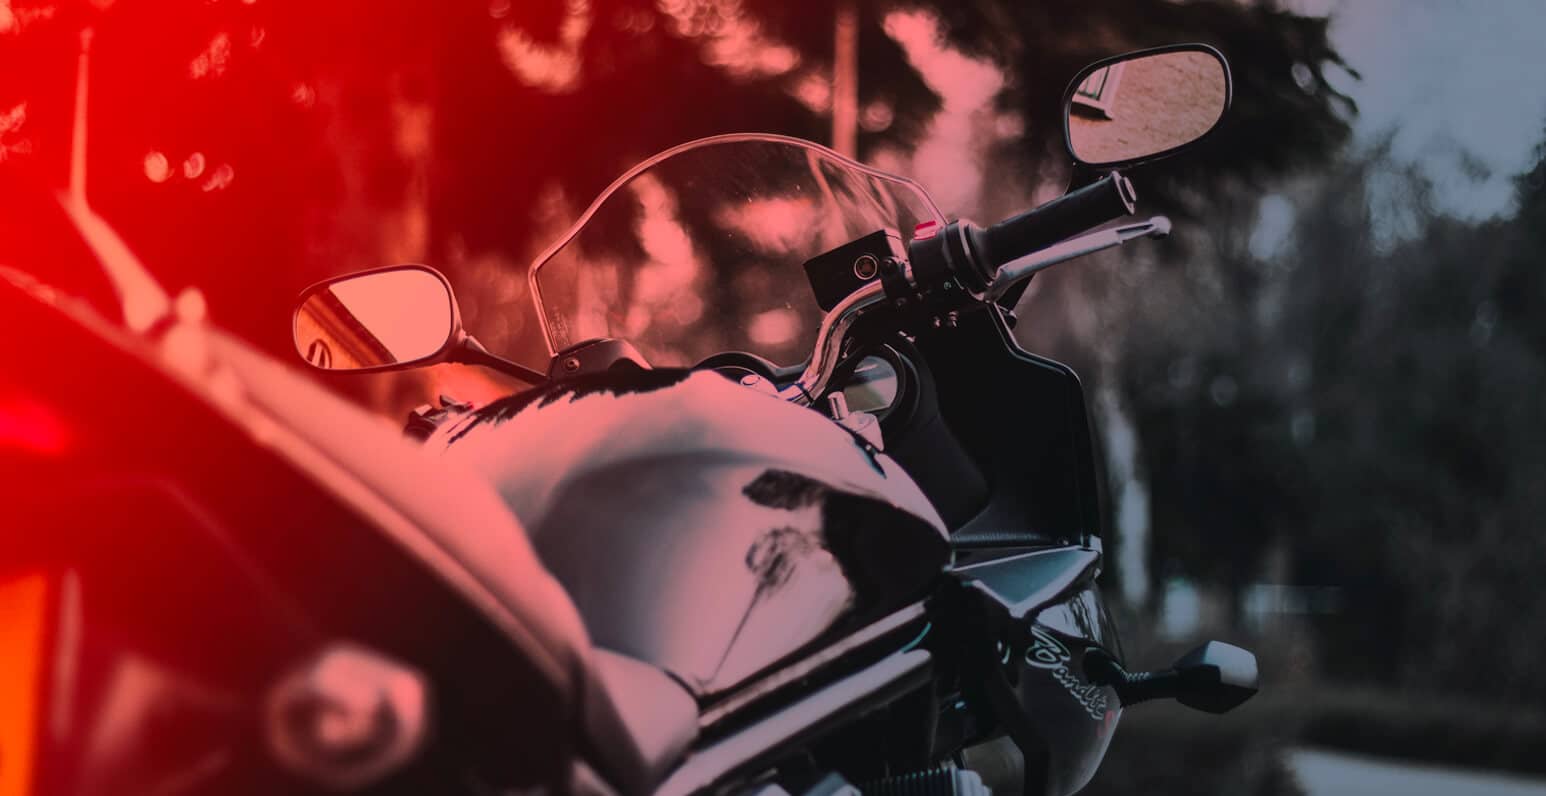 Fort Worth Motorcycle Accident Attorney